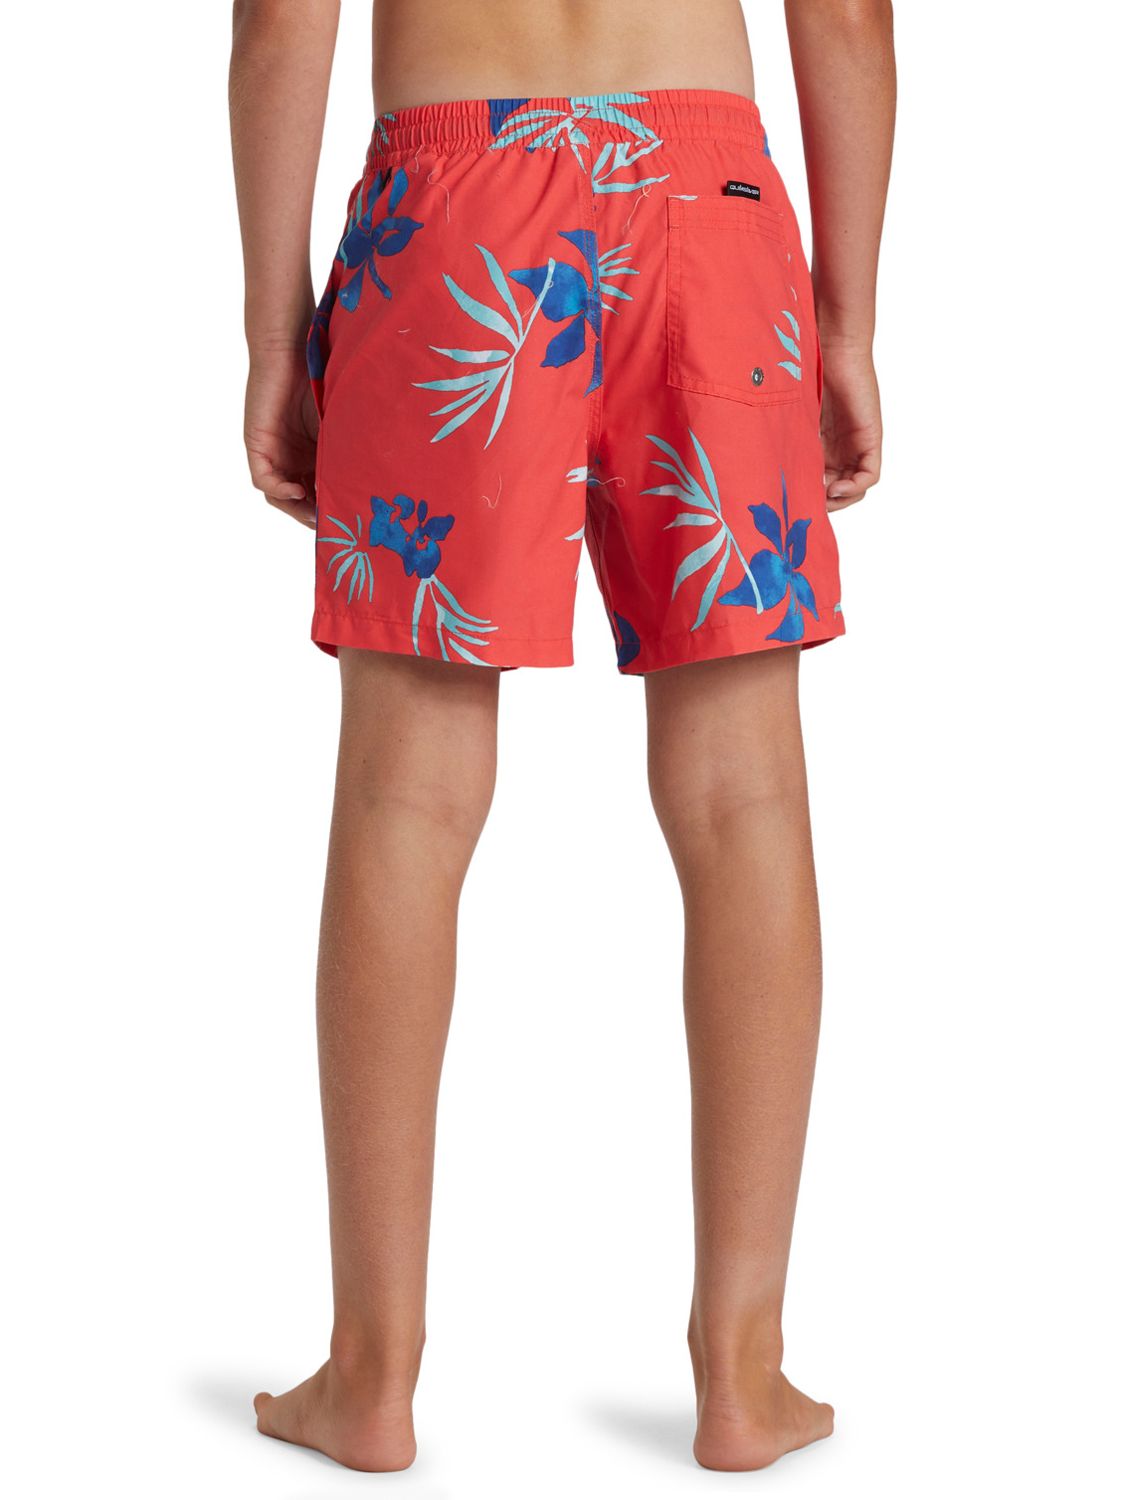 Quicksilver Kids' Everyday Collection Mix Volley Swim Shorts, Cayenne, 10 years